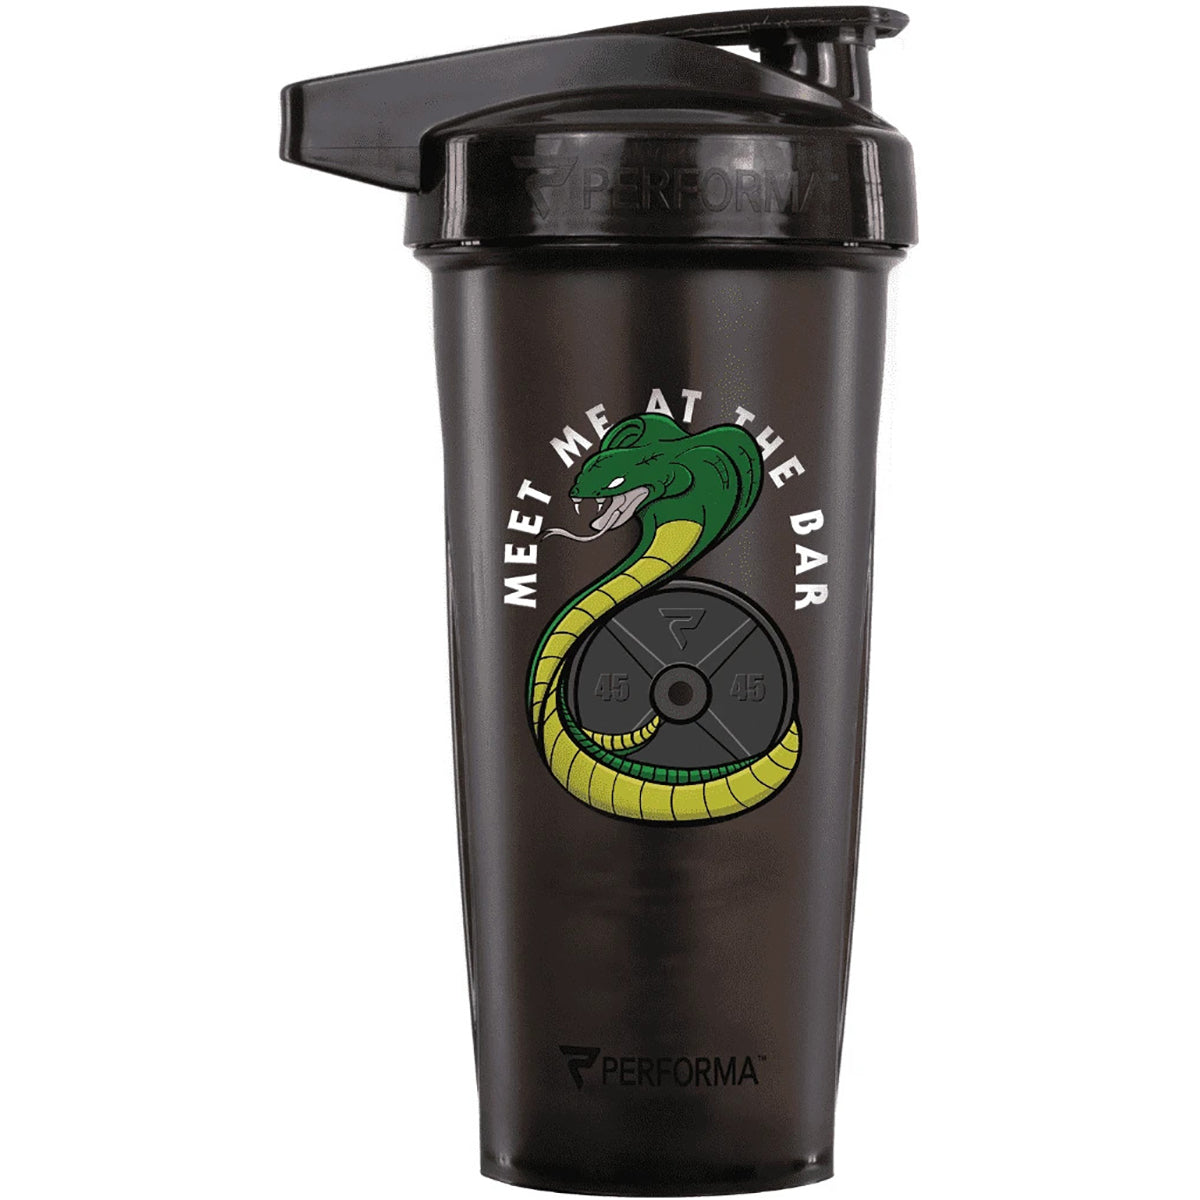 Performa Activ 28 oz. Shaker Cup Gym Bottle - Meet Me At The Bar Performa